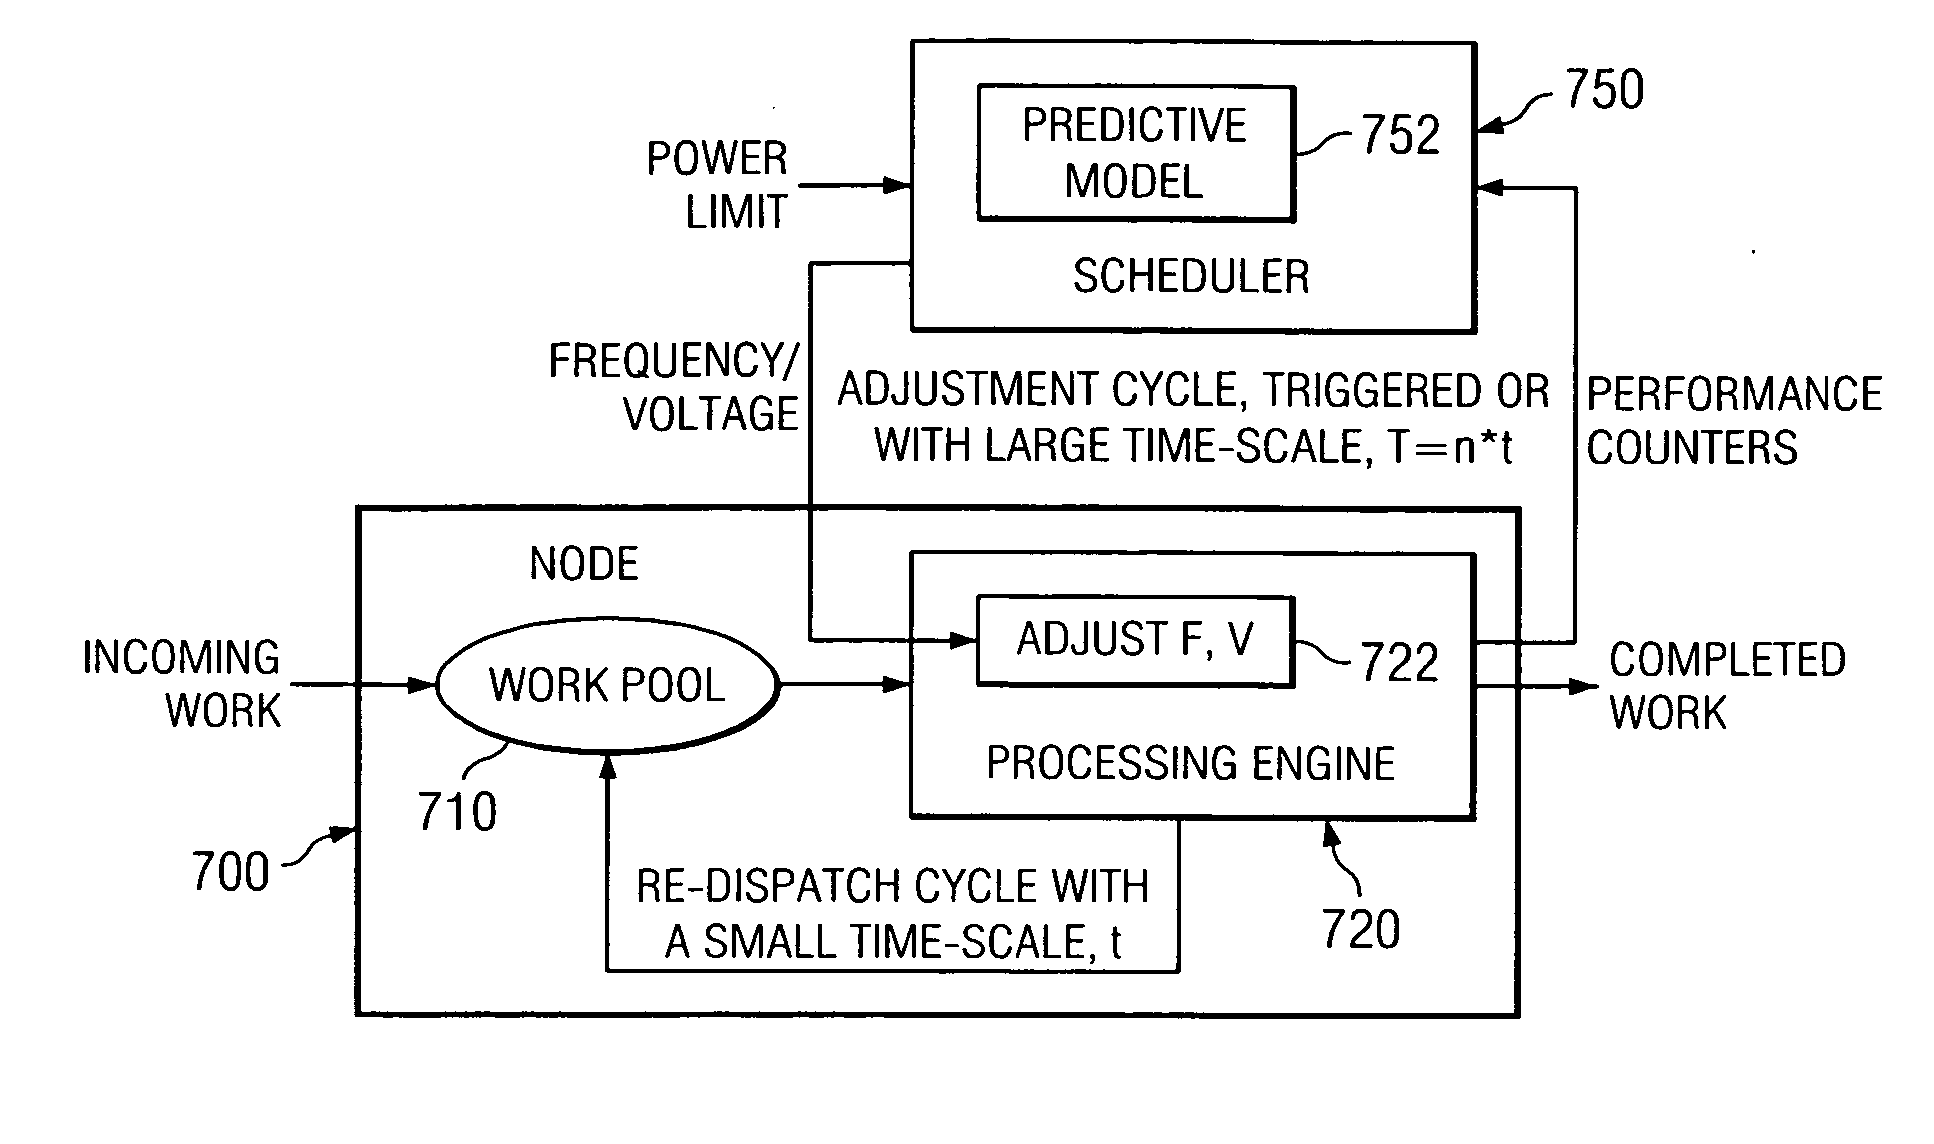 Scheduling processor voltages and frequencies based on performance prediction and power constraints